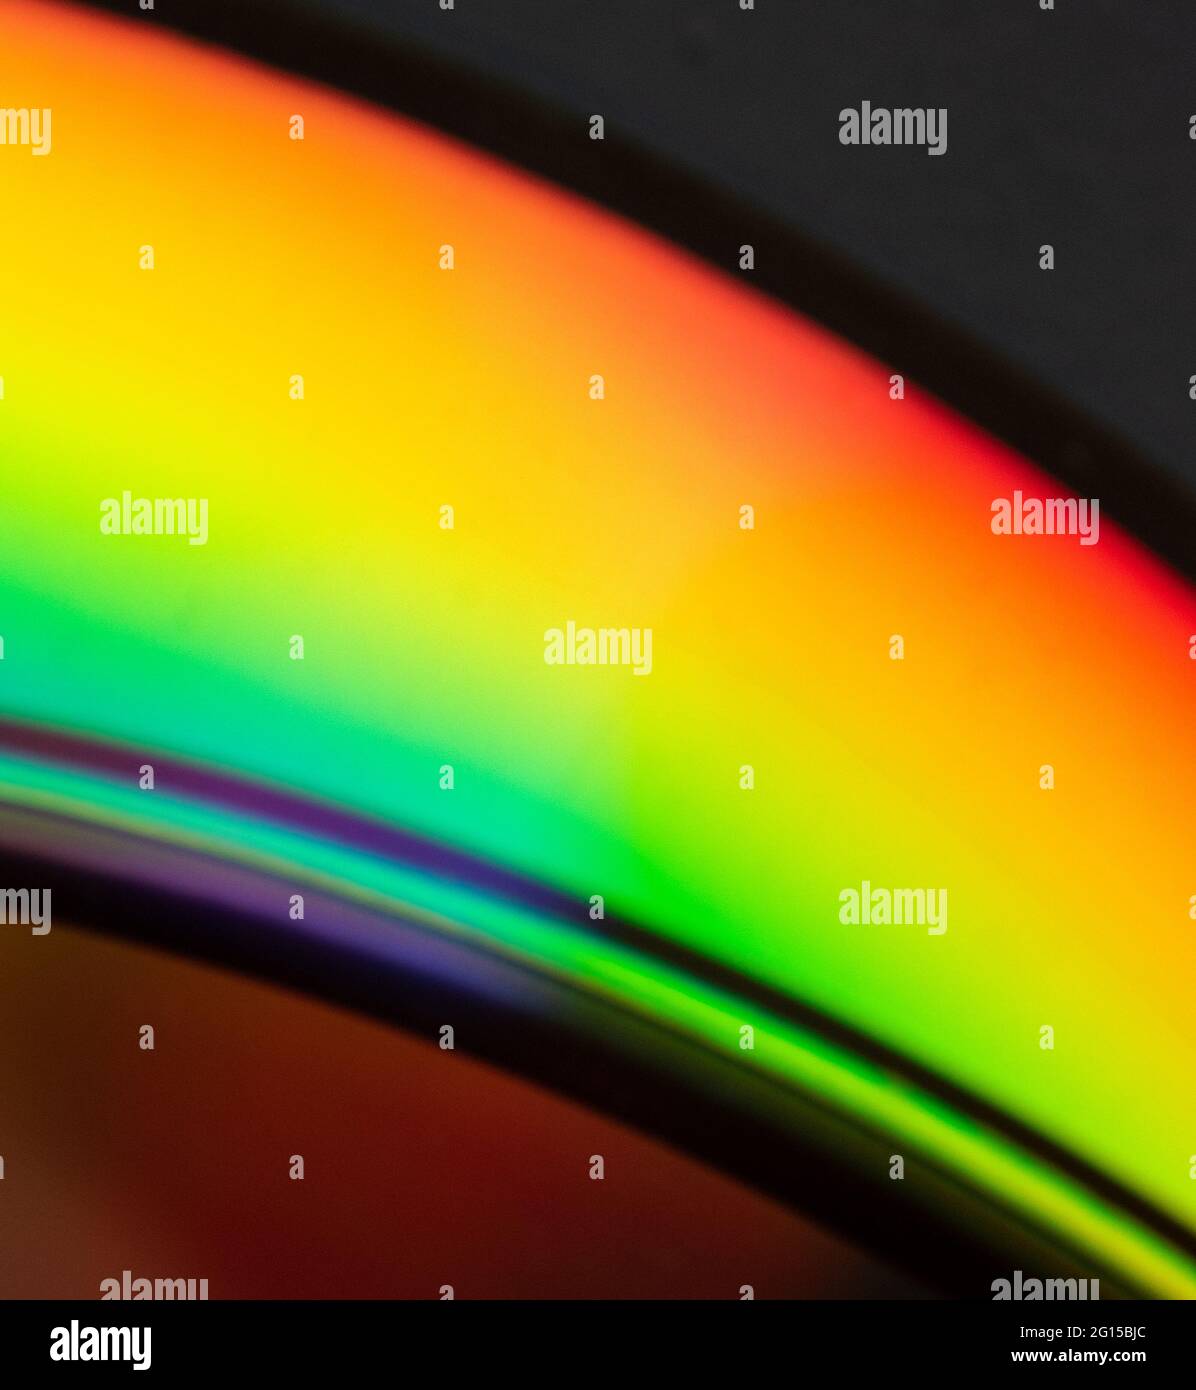 Abstract photo of the reflection of the bottom of a CD displaying a wide array of colors on its shiny film surface. Photos of different angles produci Stock Photo